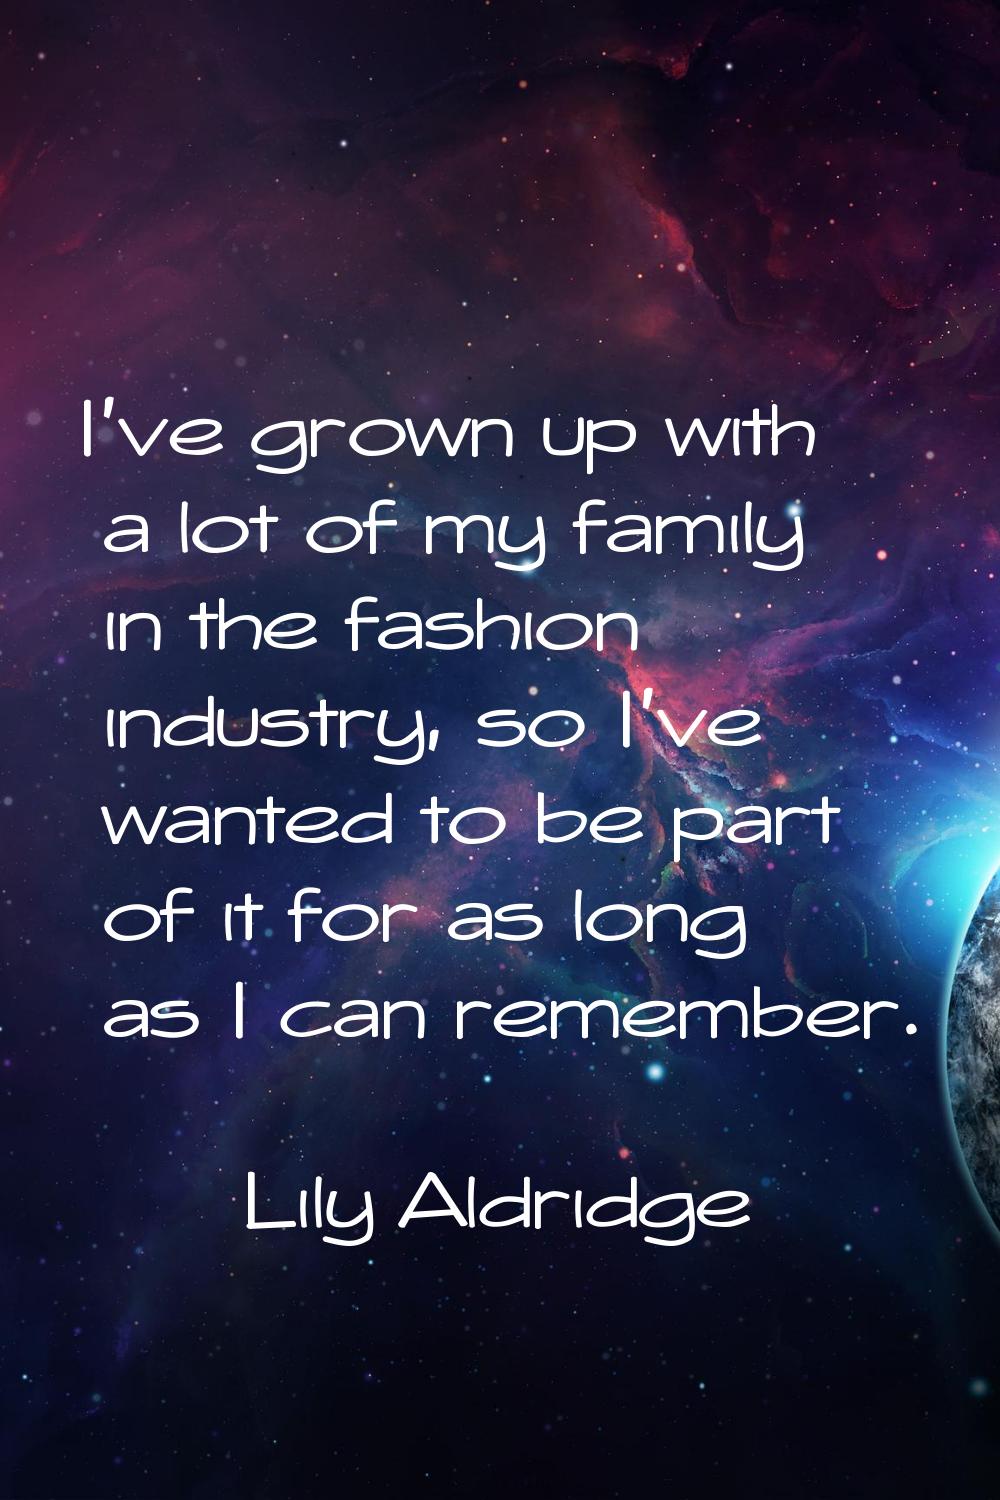 I've grown up with a lot of my family in the fashion industry, so I've wanted to be part of it for 